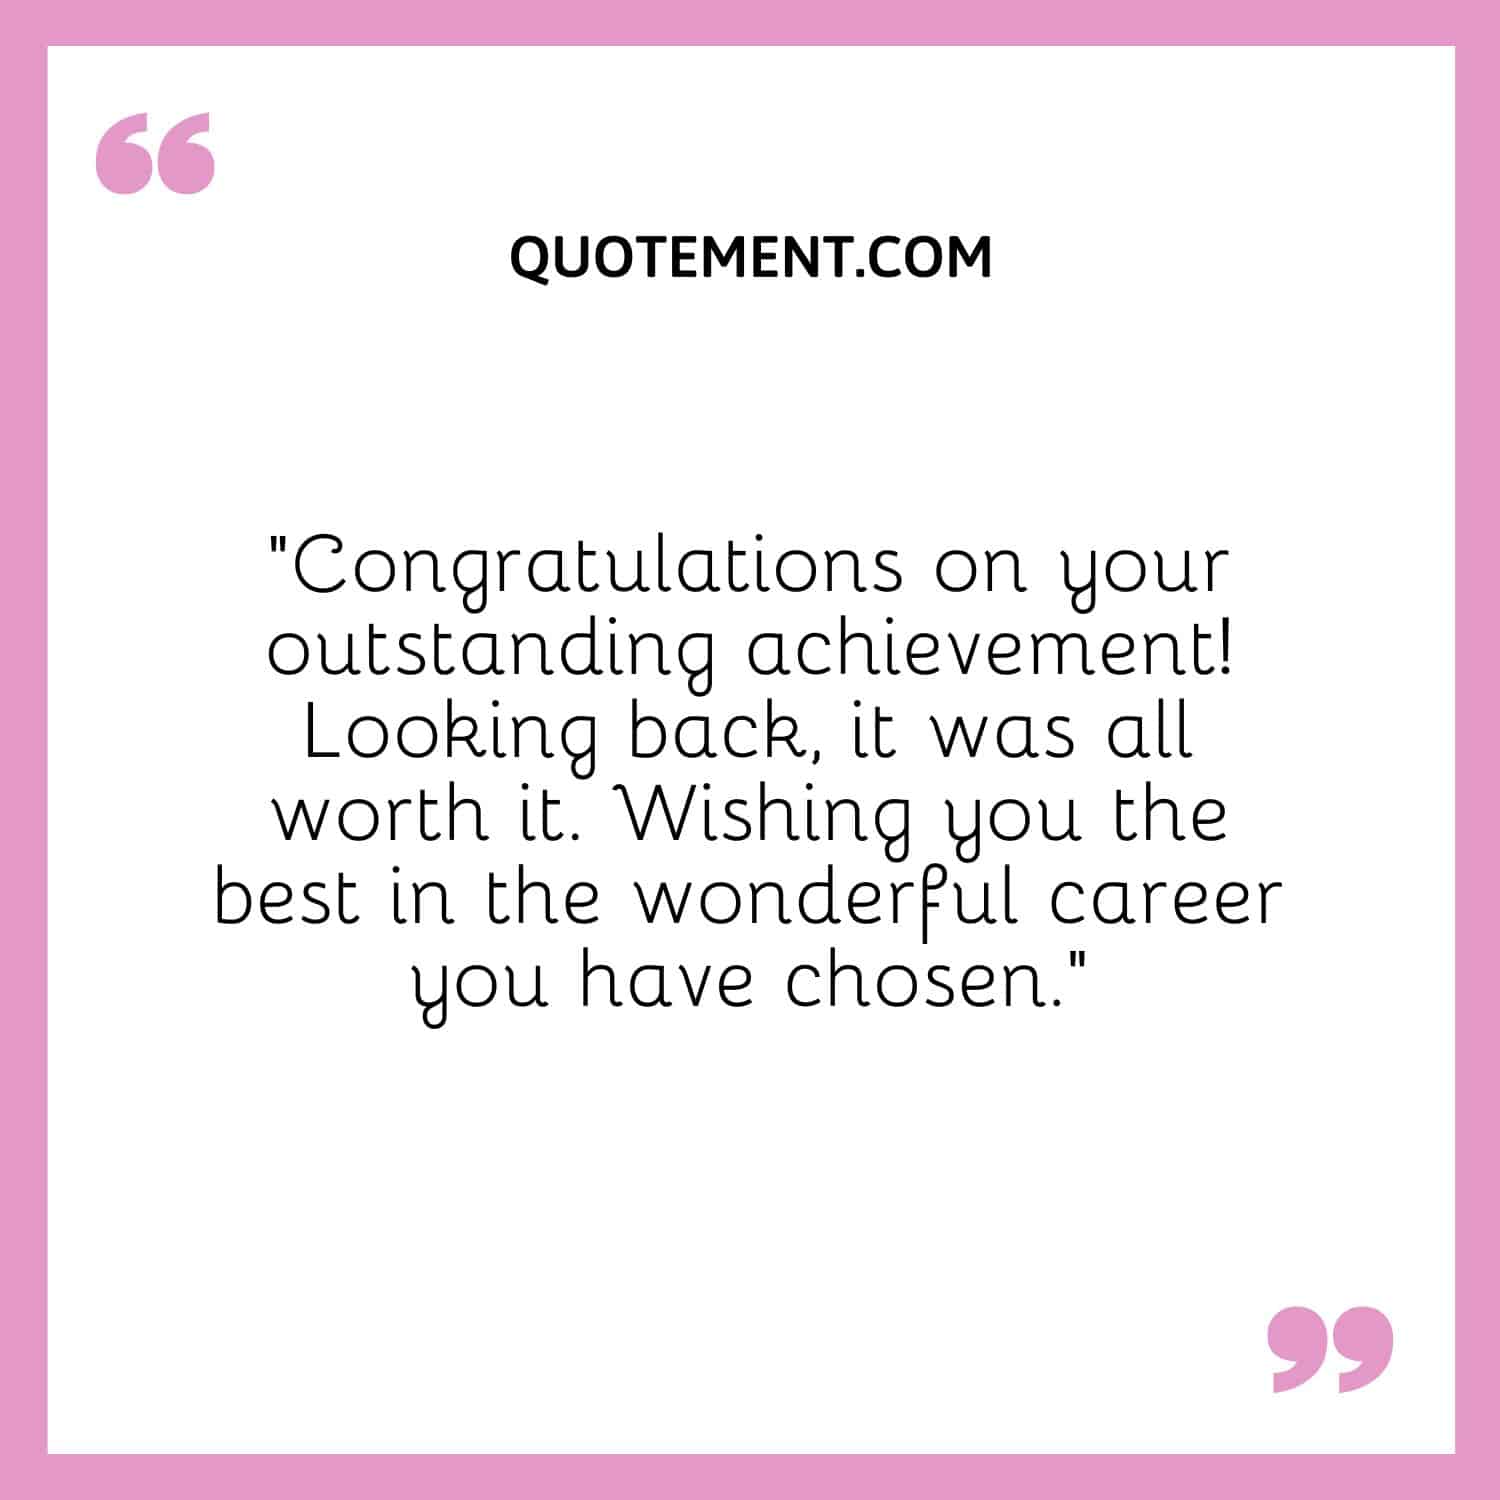 “Congratulations on your outstanding achievement! Looking back, it was all worth it. Wishing you the best in the wonderful career you have chosen.”